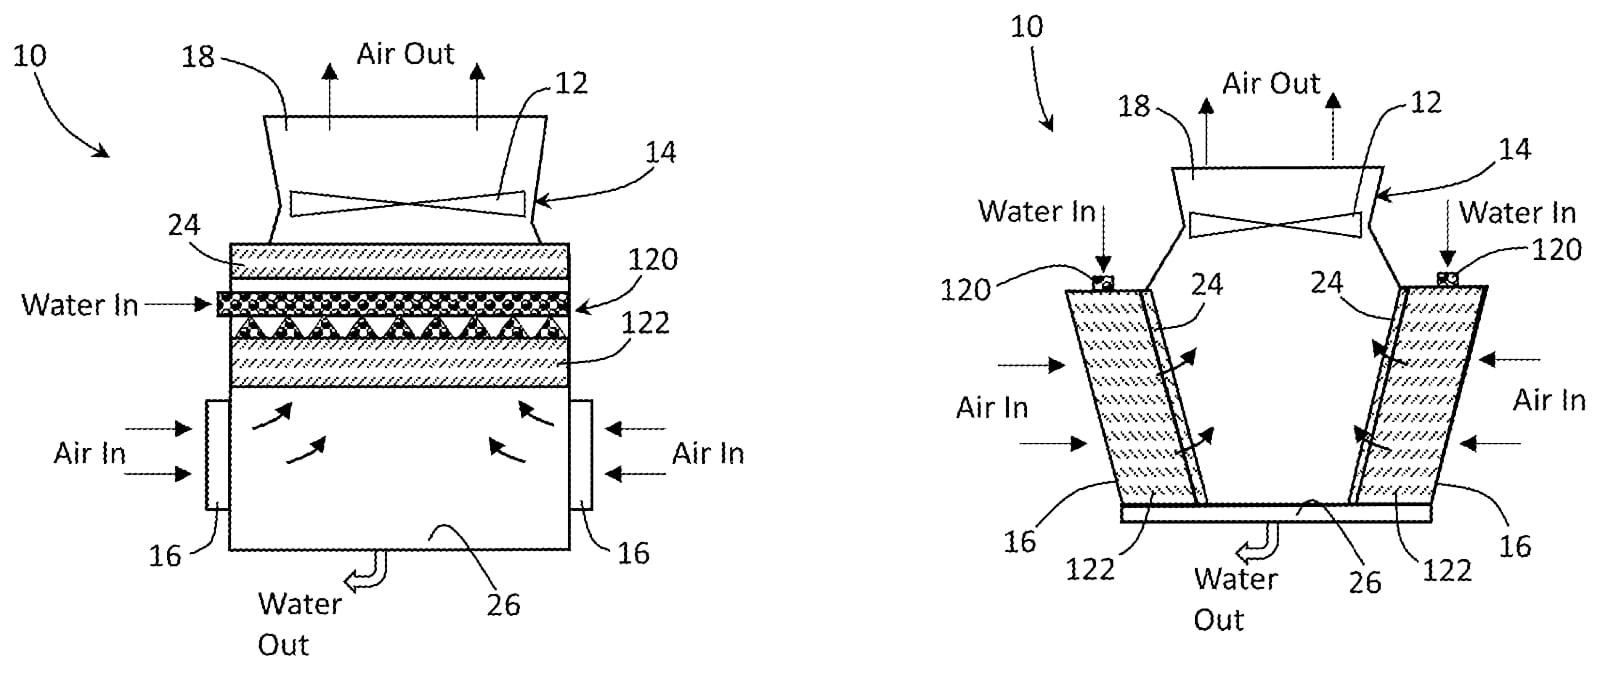 A diagram from Bryan Hubbard's patent for an evaporative cooling system that operates to cool a stream of a liquid with air as the stream flows through the system in a downstream direction of the stream